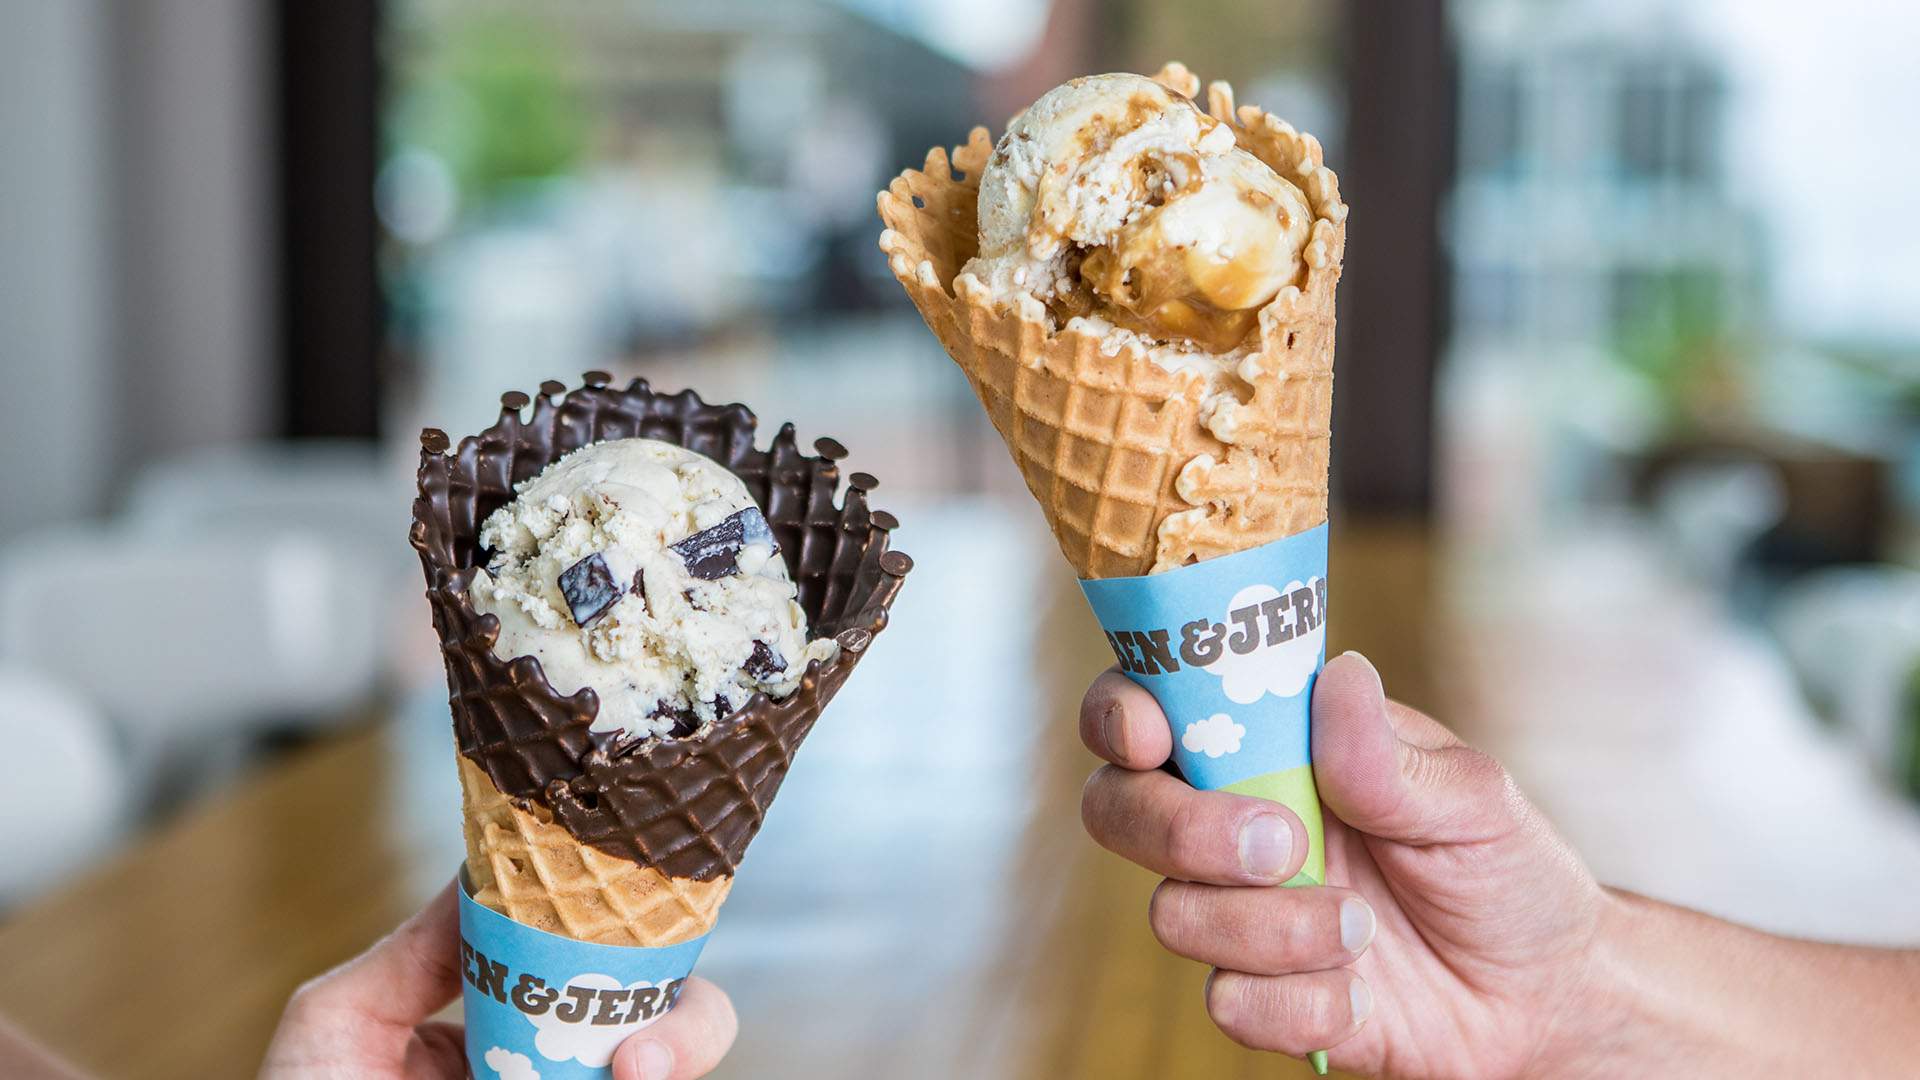 Ben & Jerry's Will Give Out Free Ice Cream the Next Time the Temperature Hits 31 Degrees